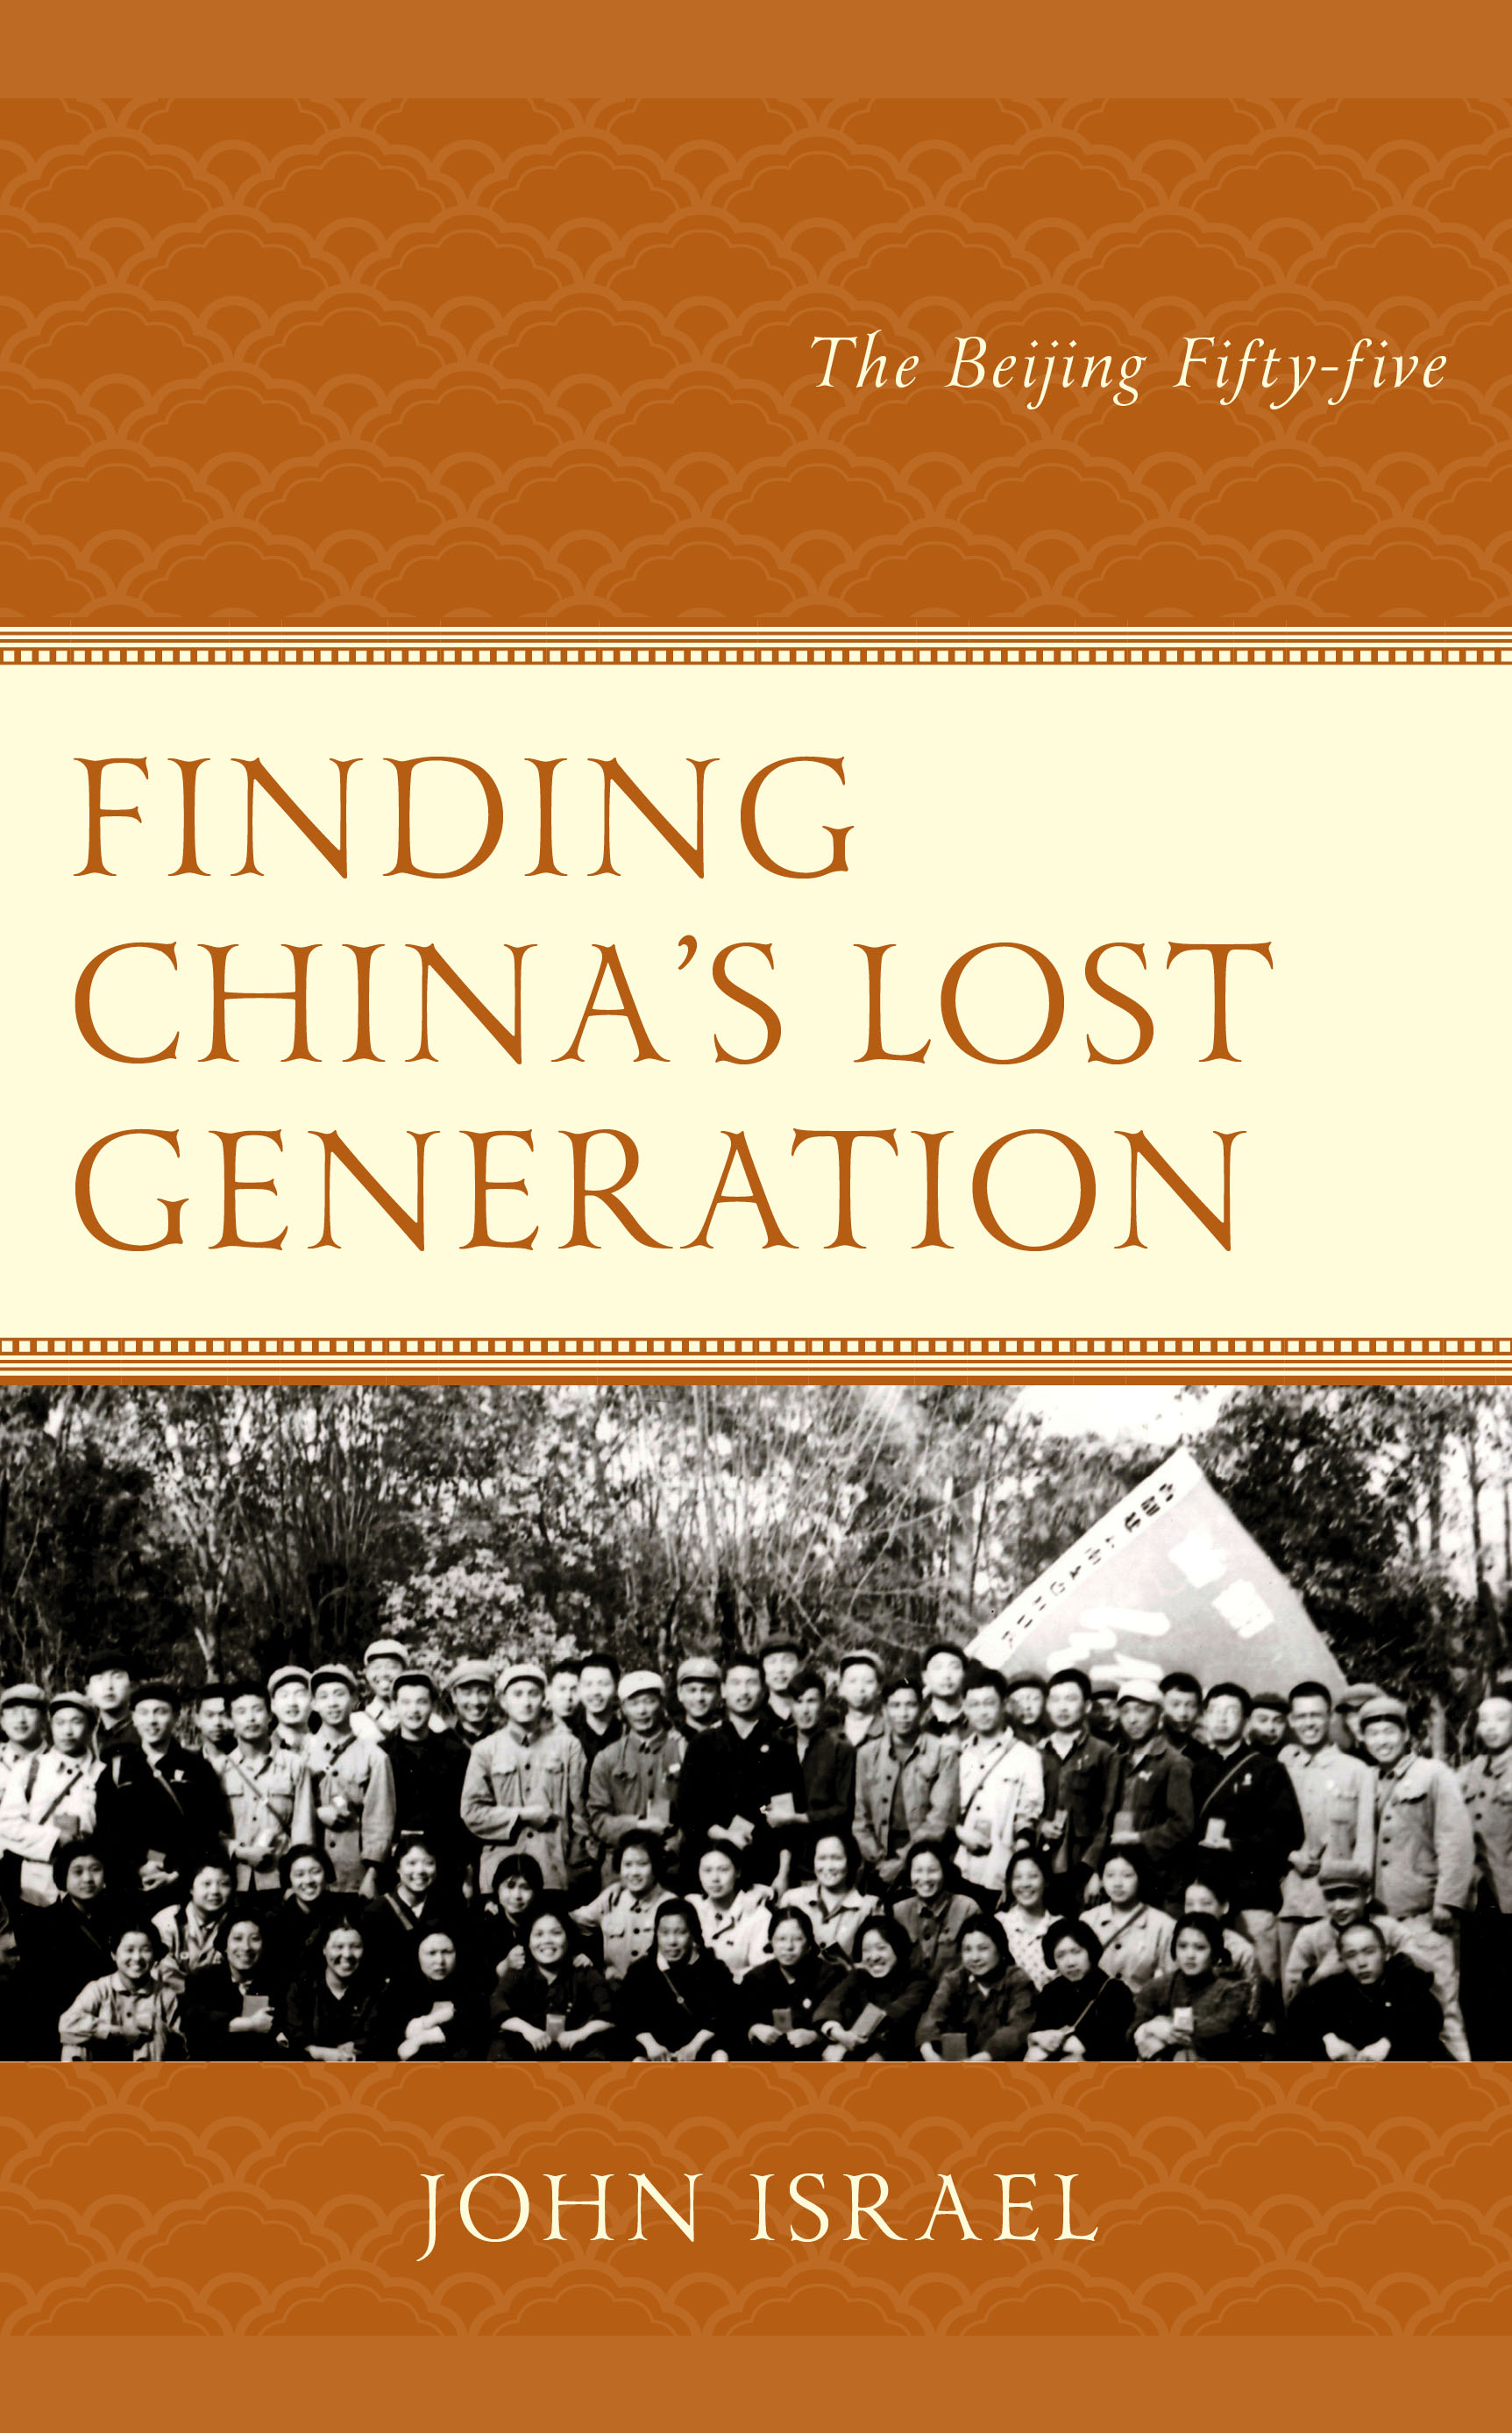 Finding China's Lost Generation: The Beijing Fifty-five